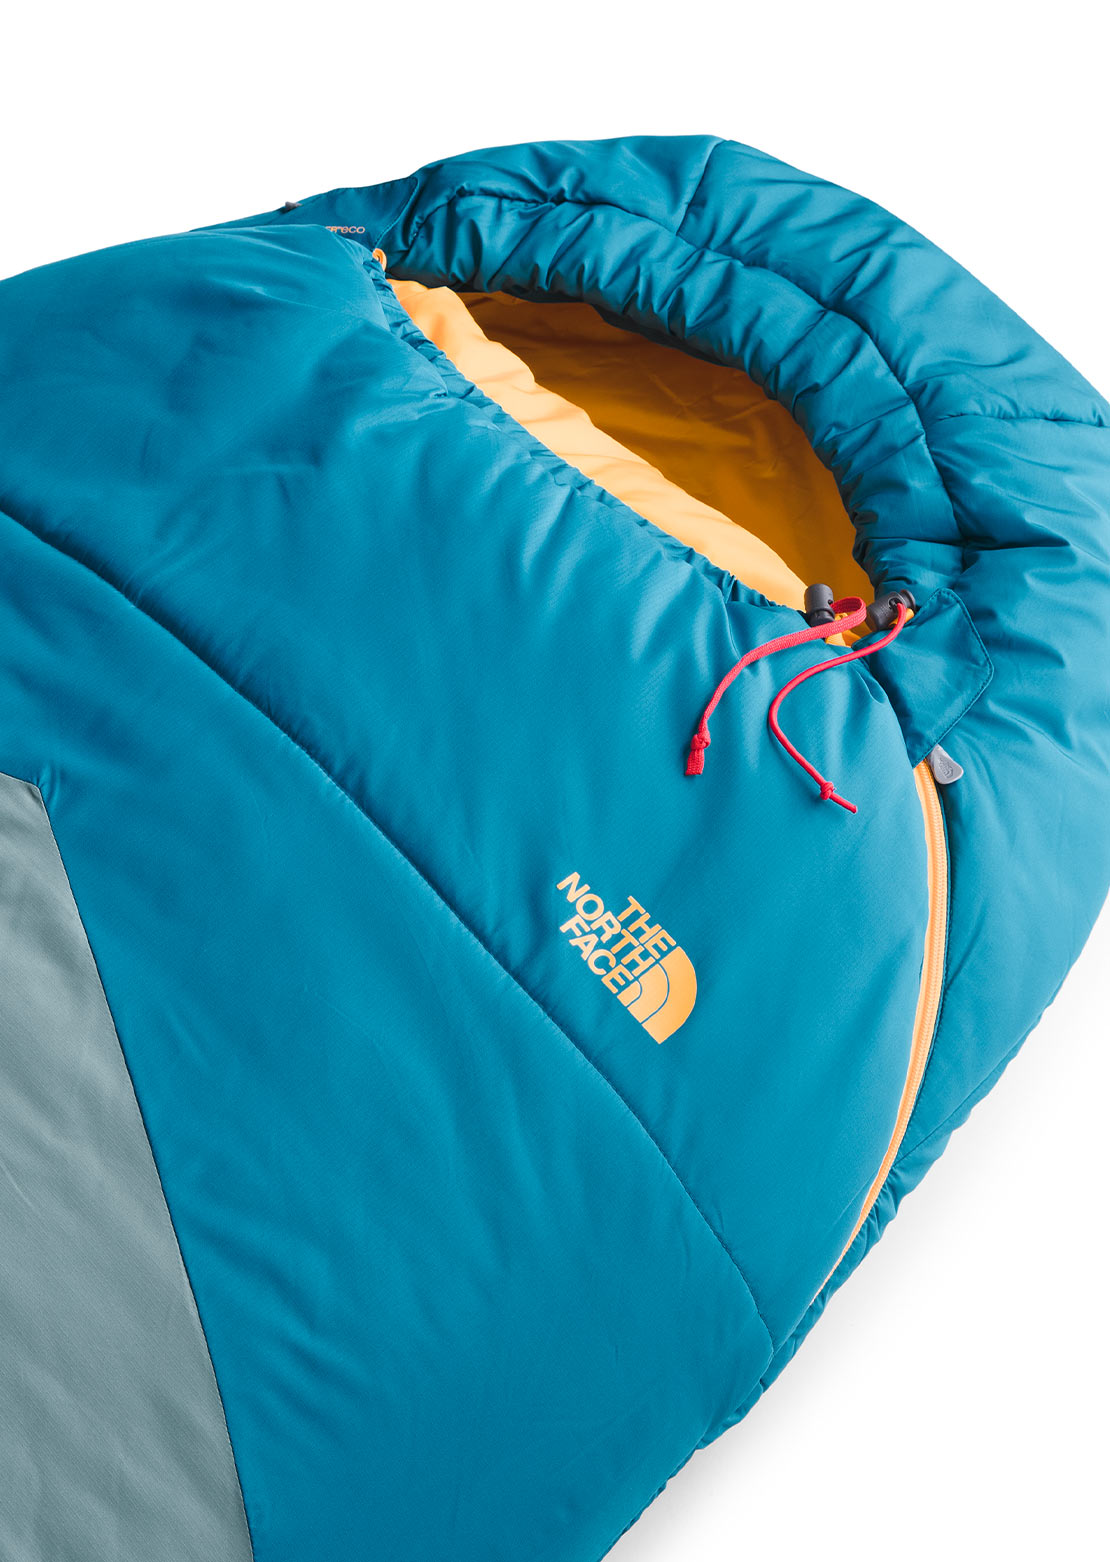 The North Face Wasatch Pro 20 Right Handed Sleeping Bag Banff Blue/Goblin Blue